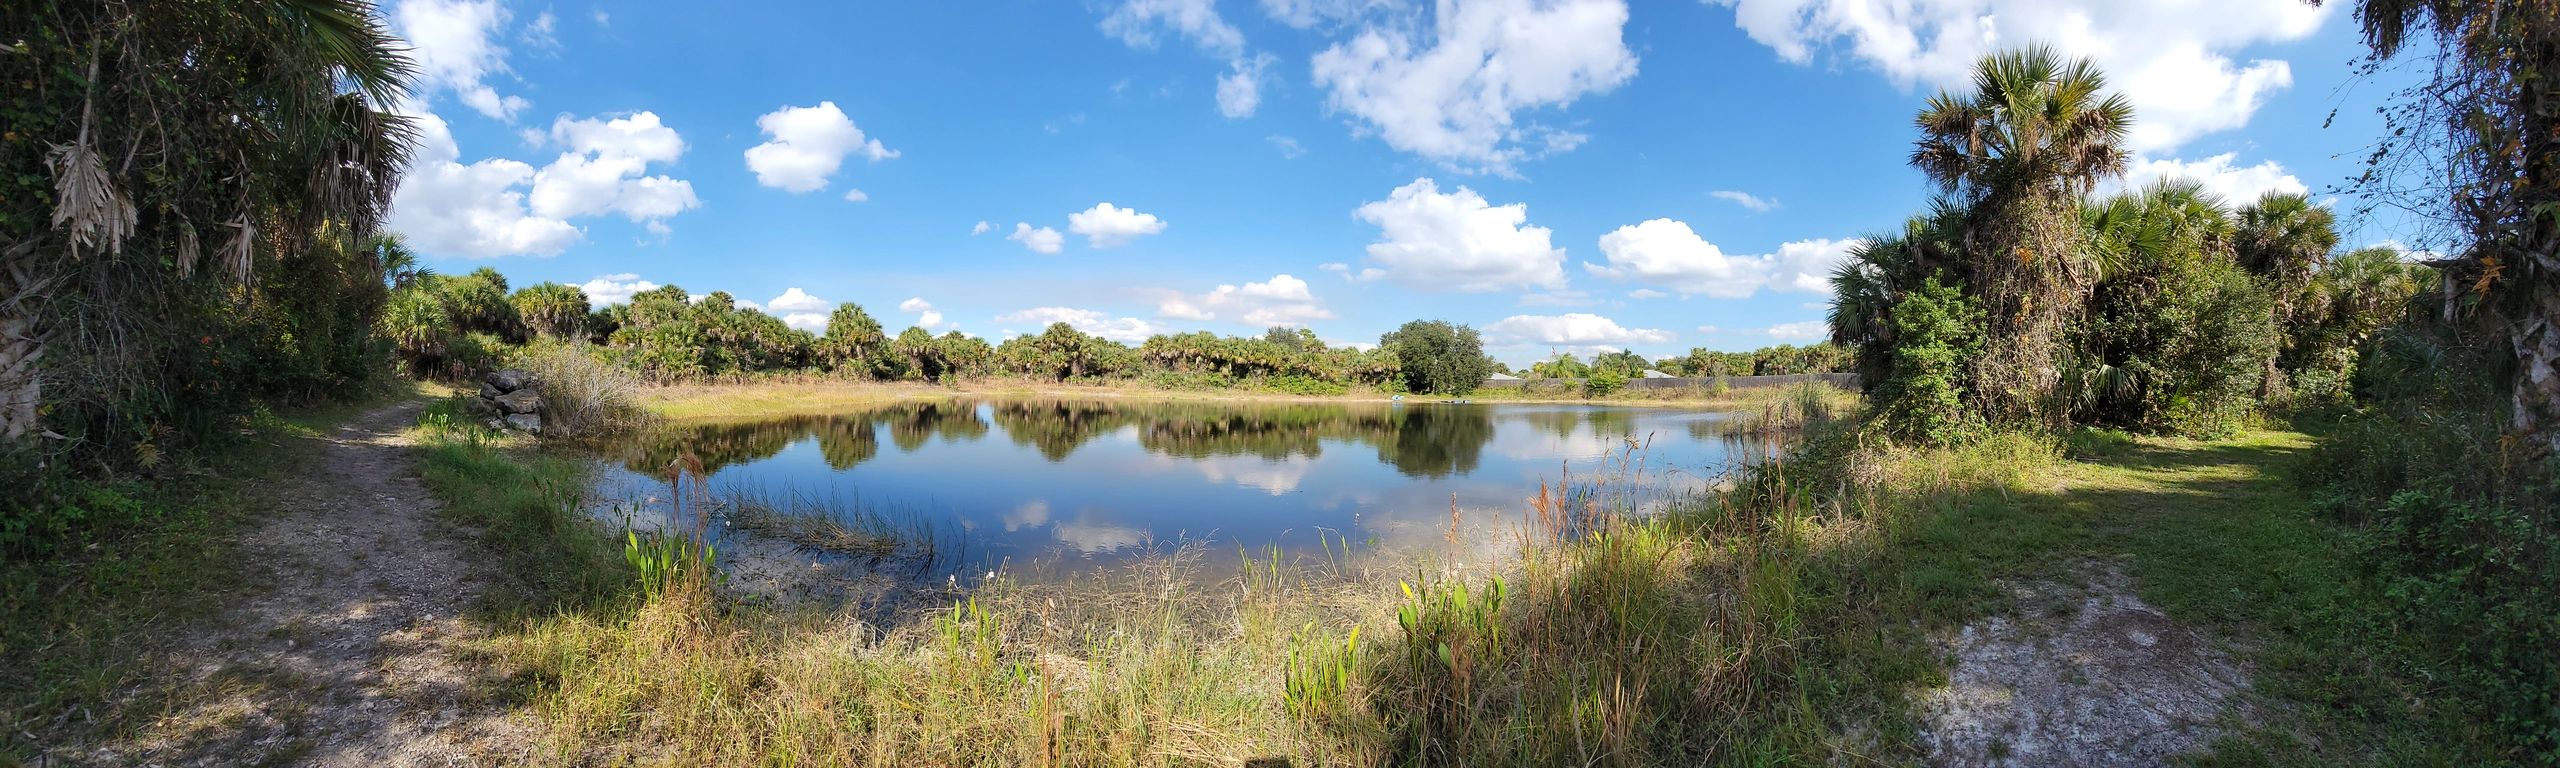 Rivers Road Preserve, Conservation Collier, Naples, Florida - Panorama Photo